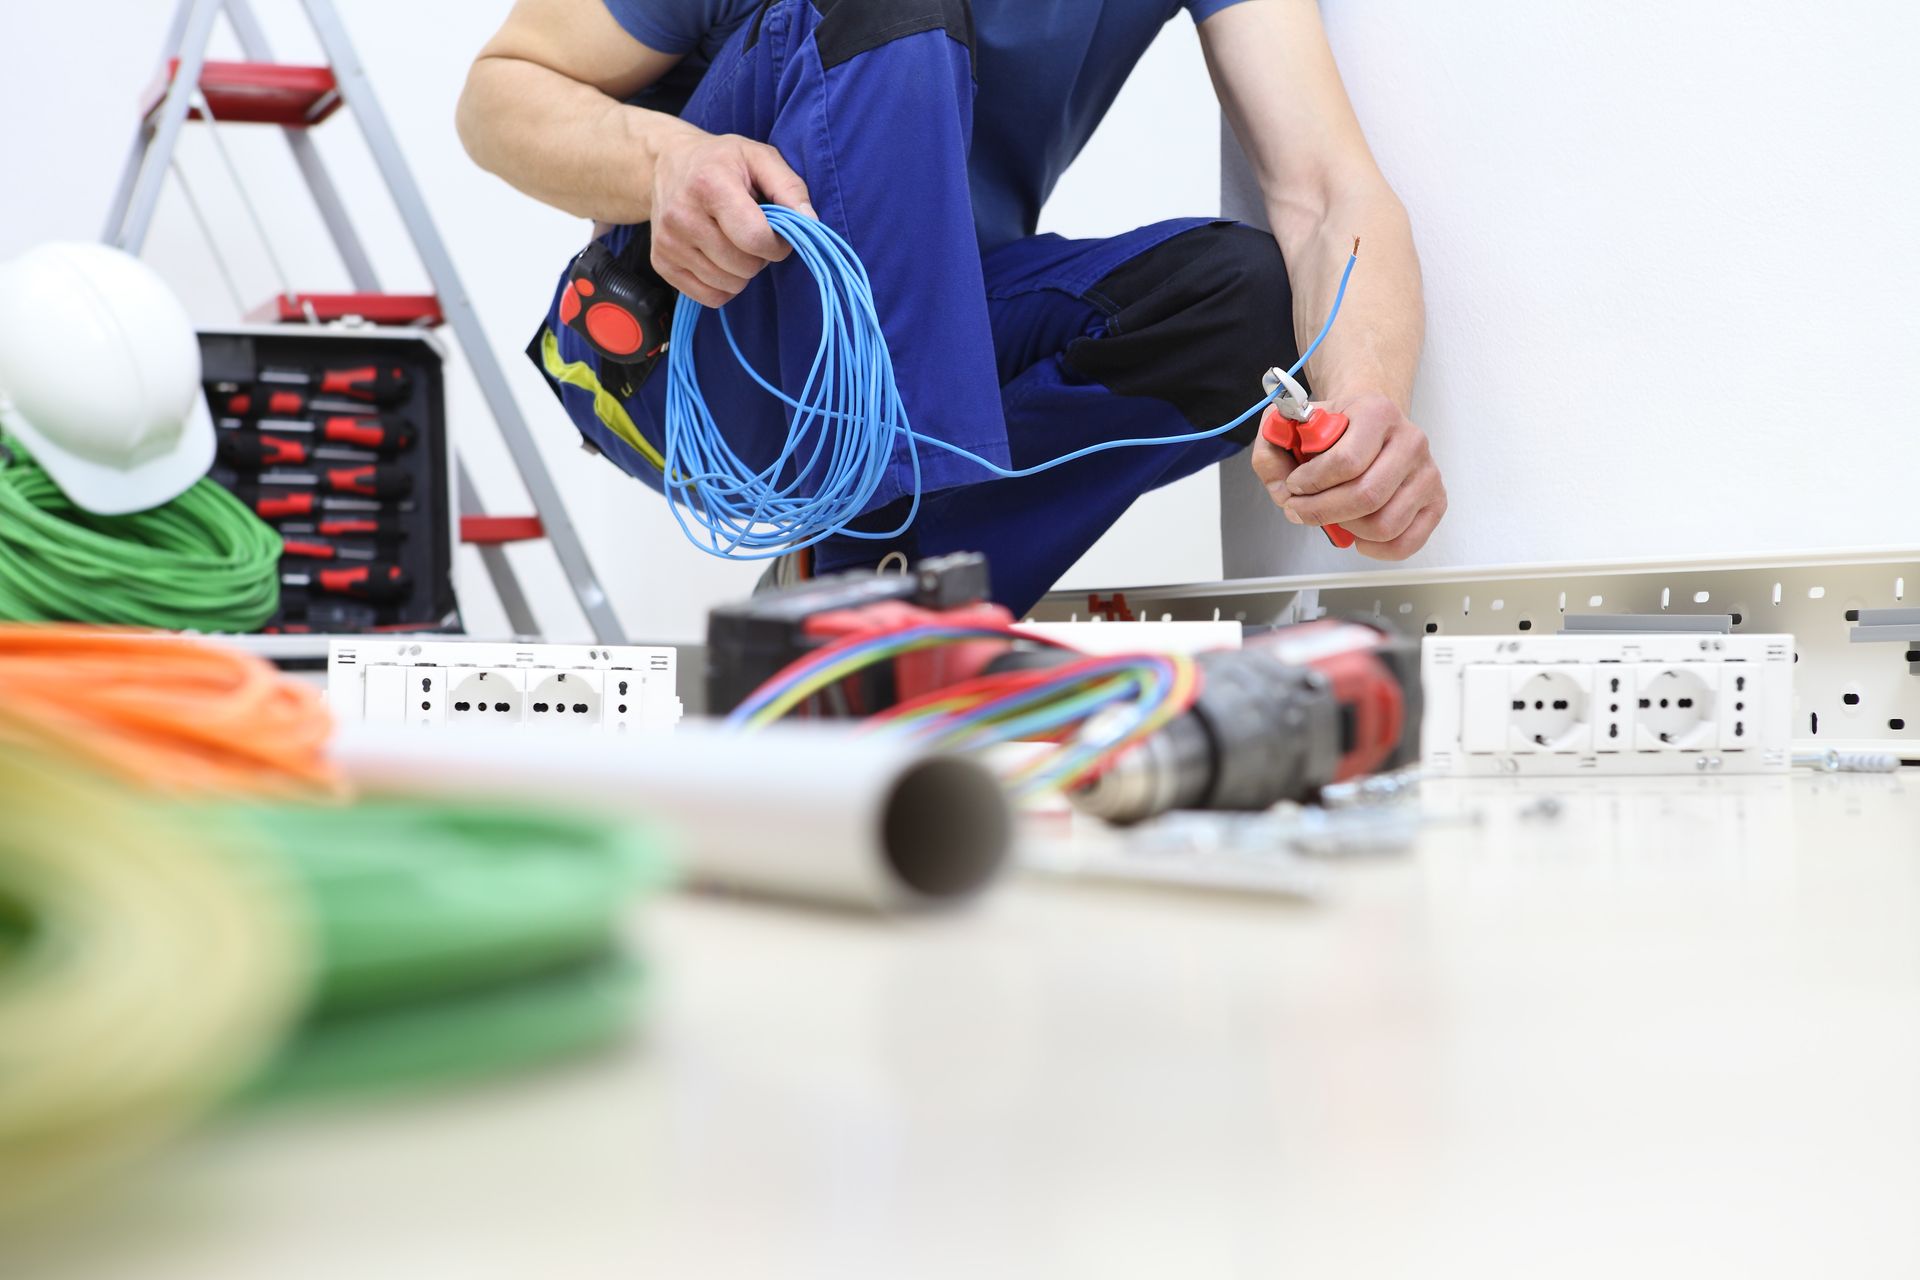 Skilled electrician using nippers to cut electric cable while installing circuits and wiring in an electrical project.